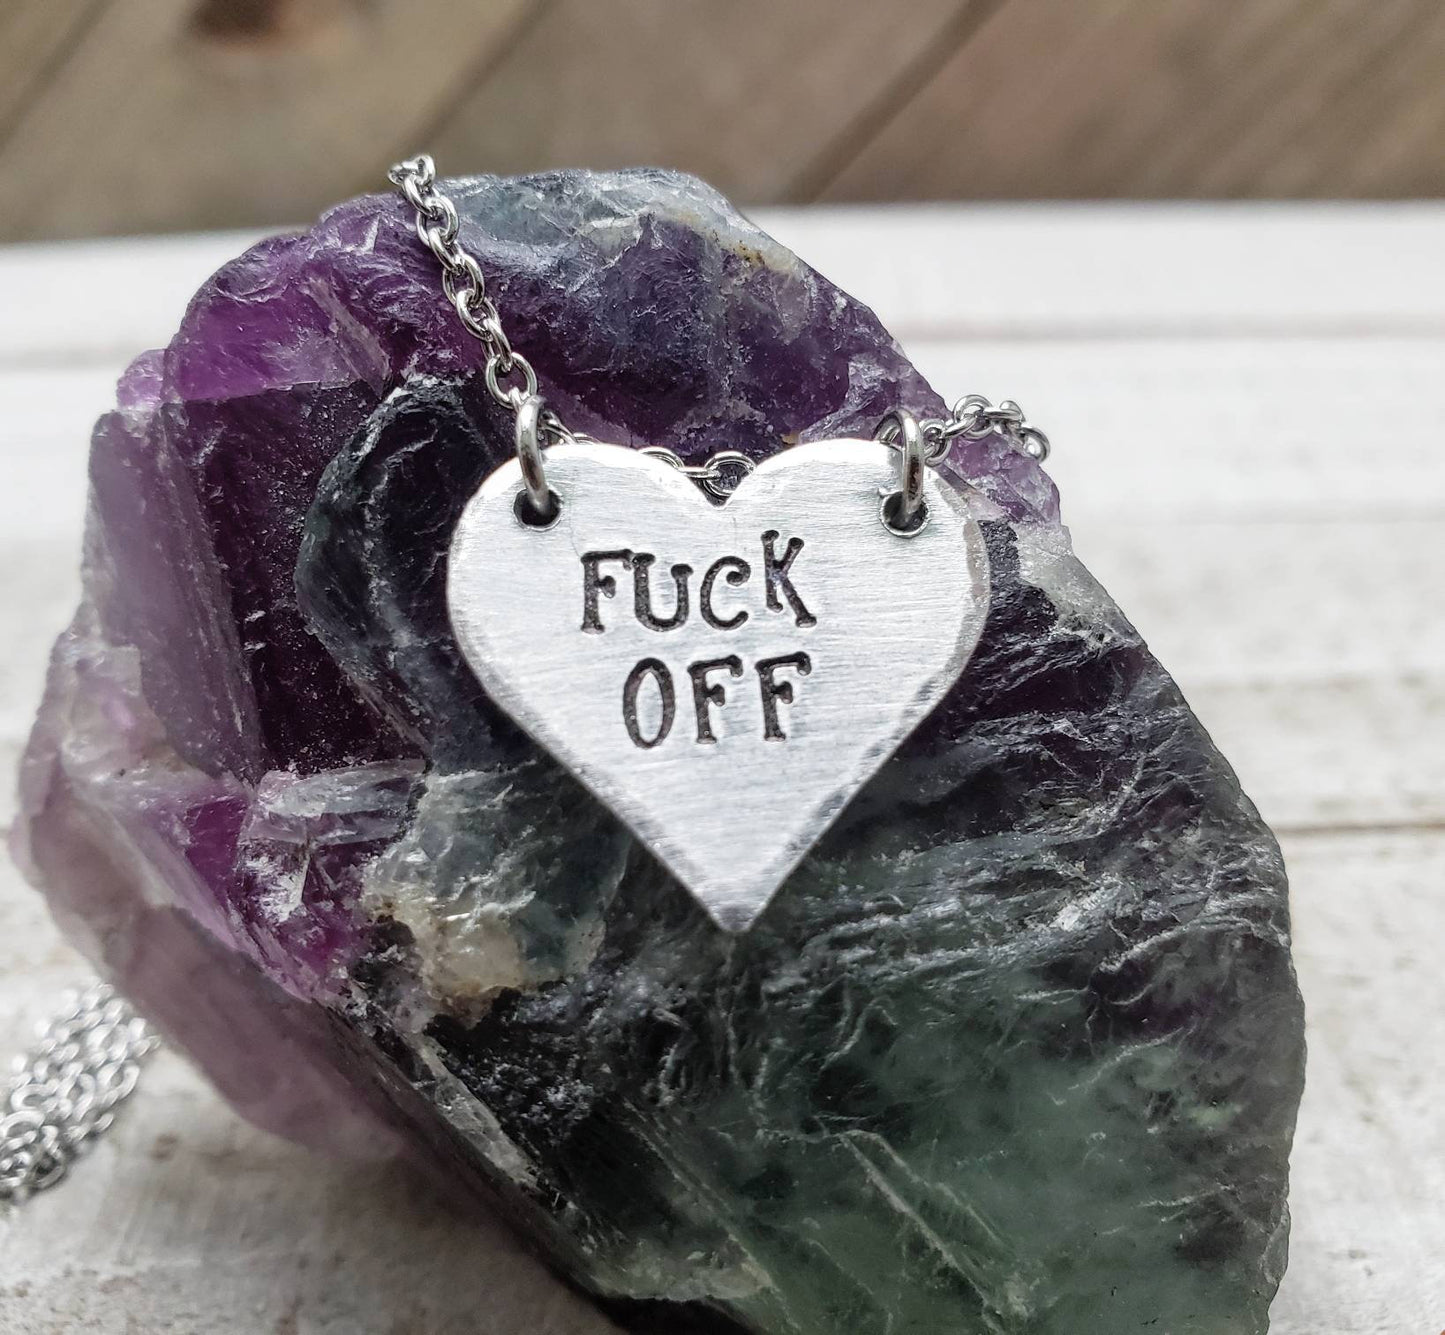 F*ck off necklace